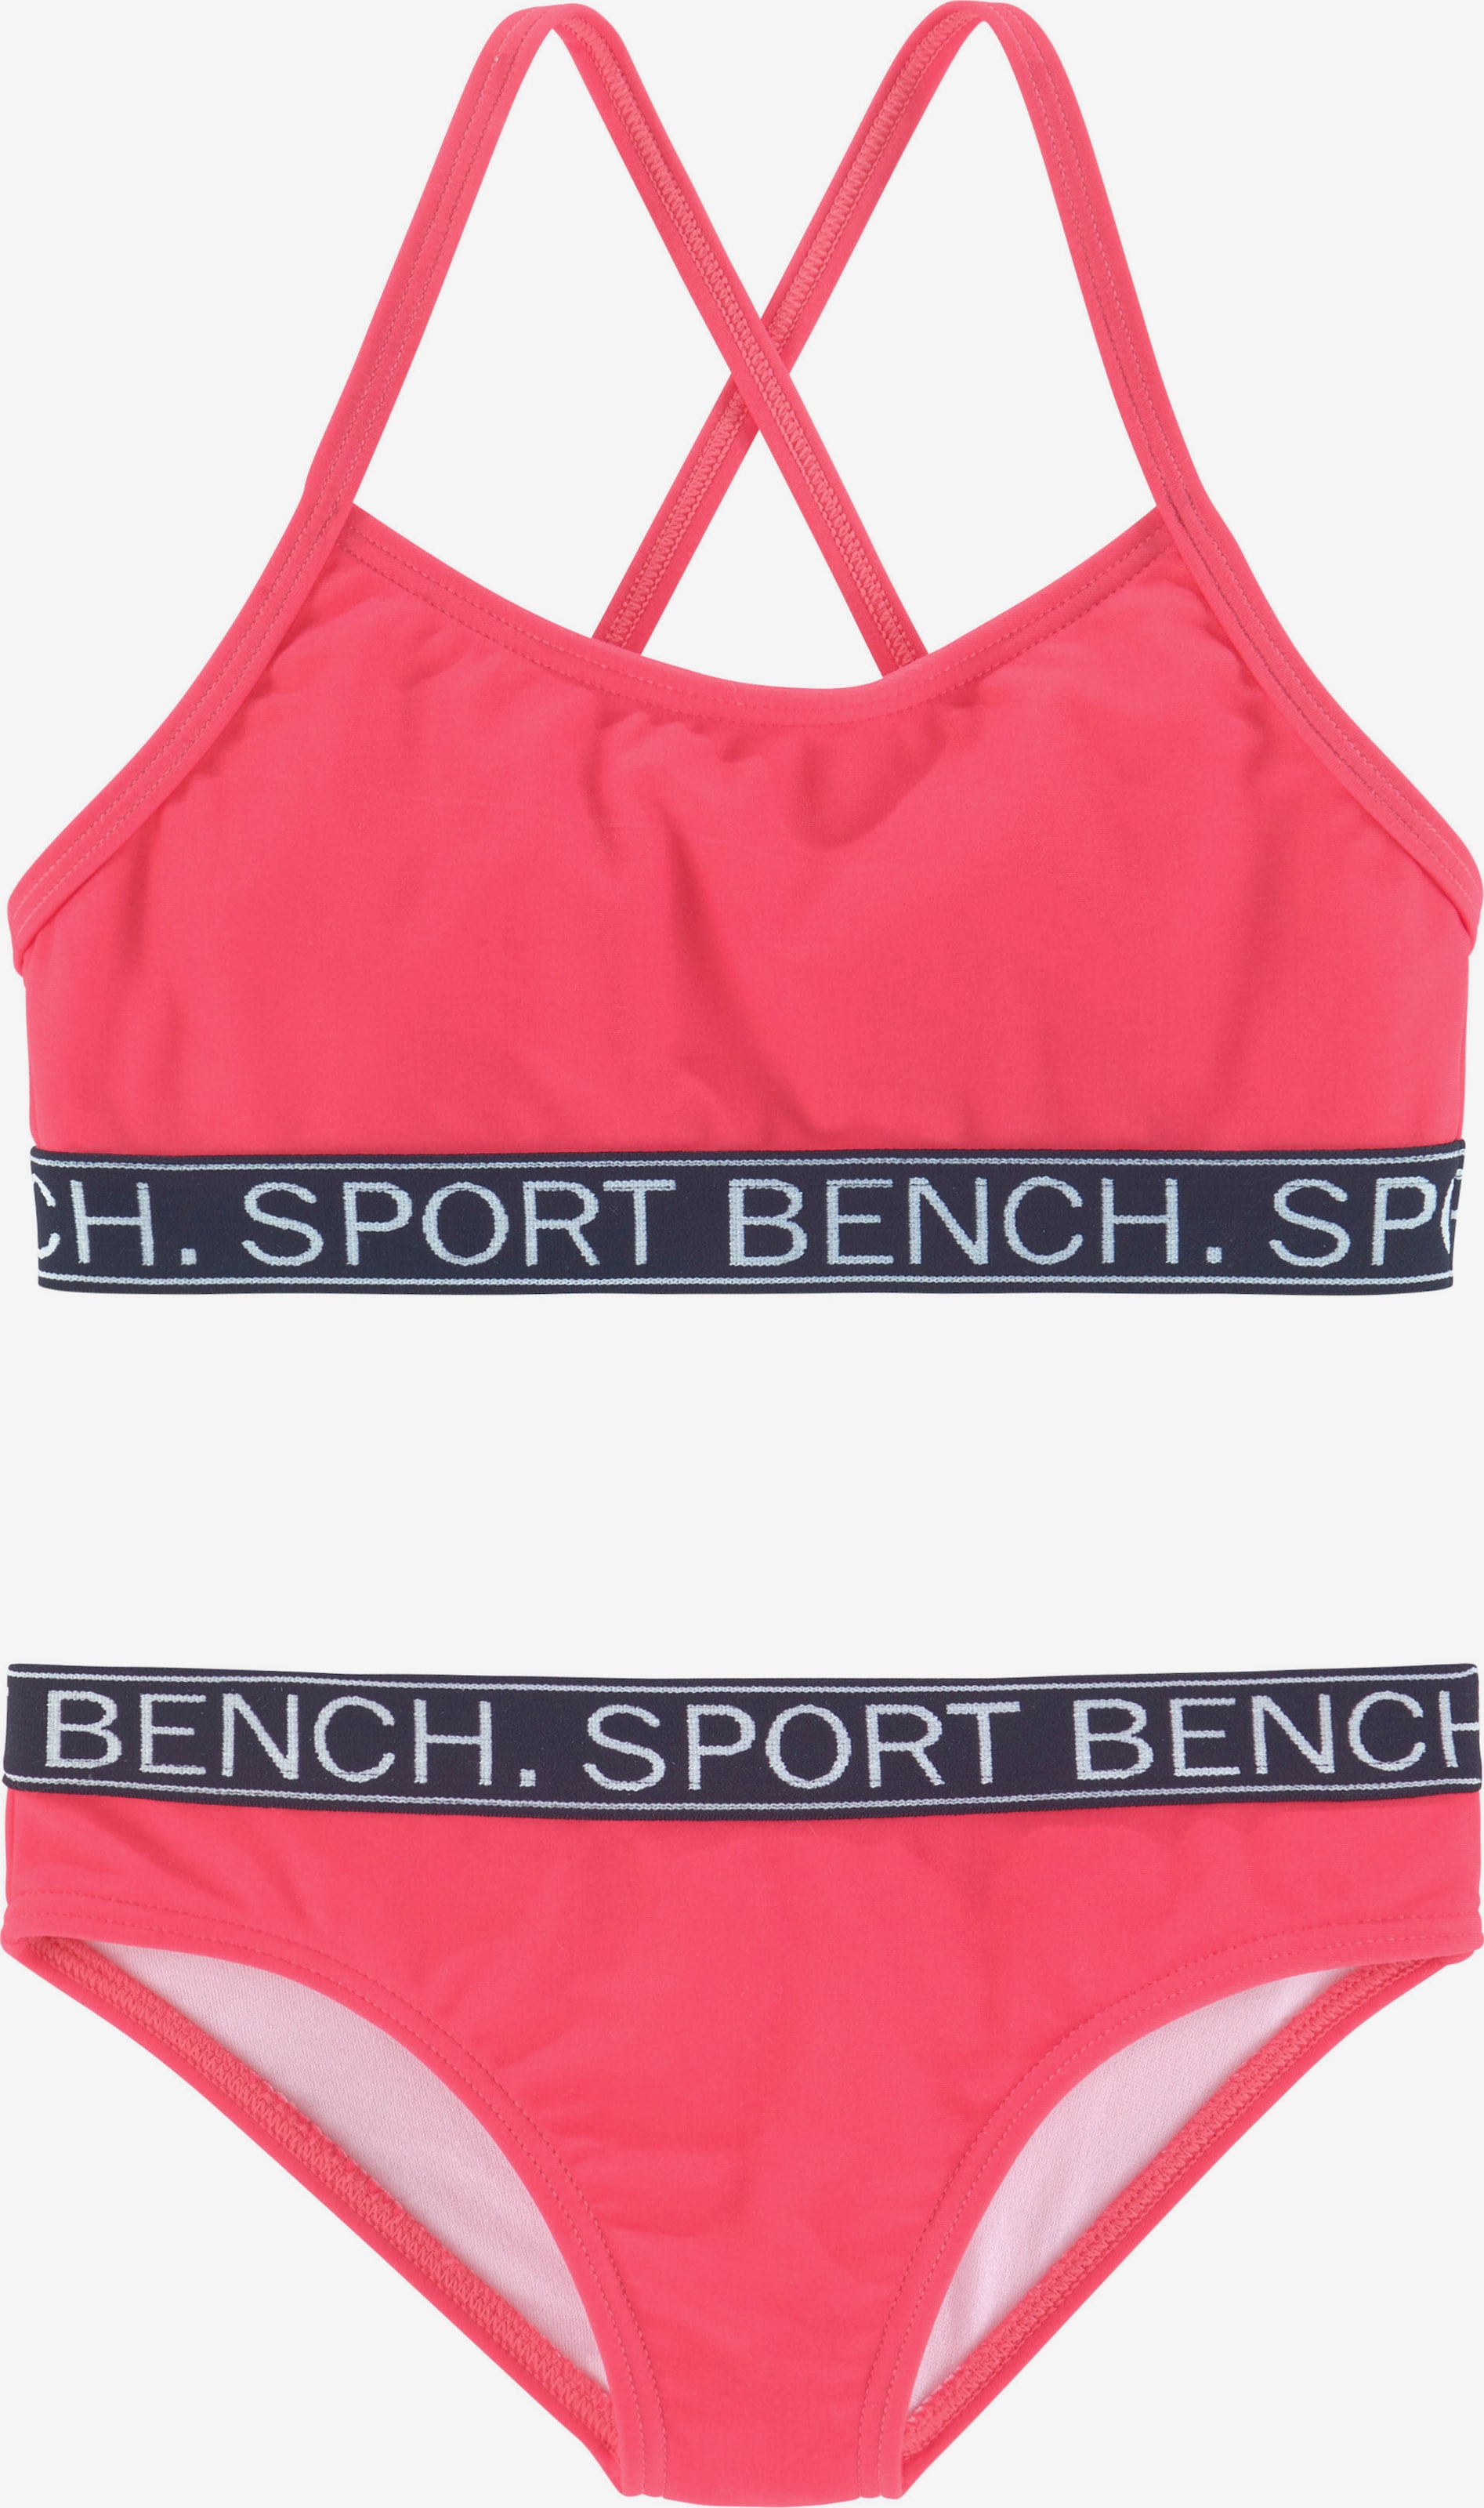 ABOUT in BENCH Bikini Pink Bustier YOU |